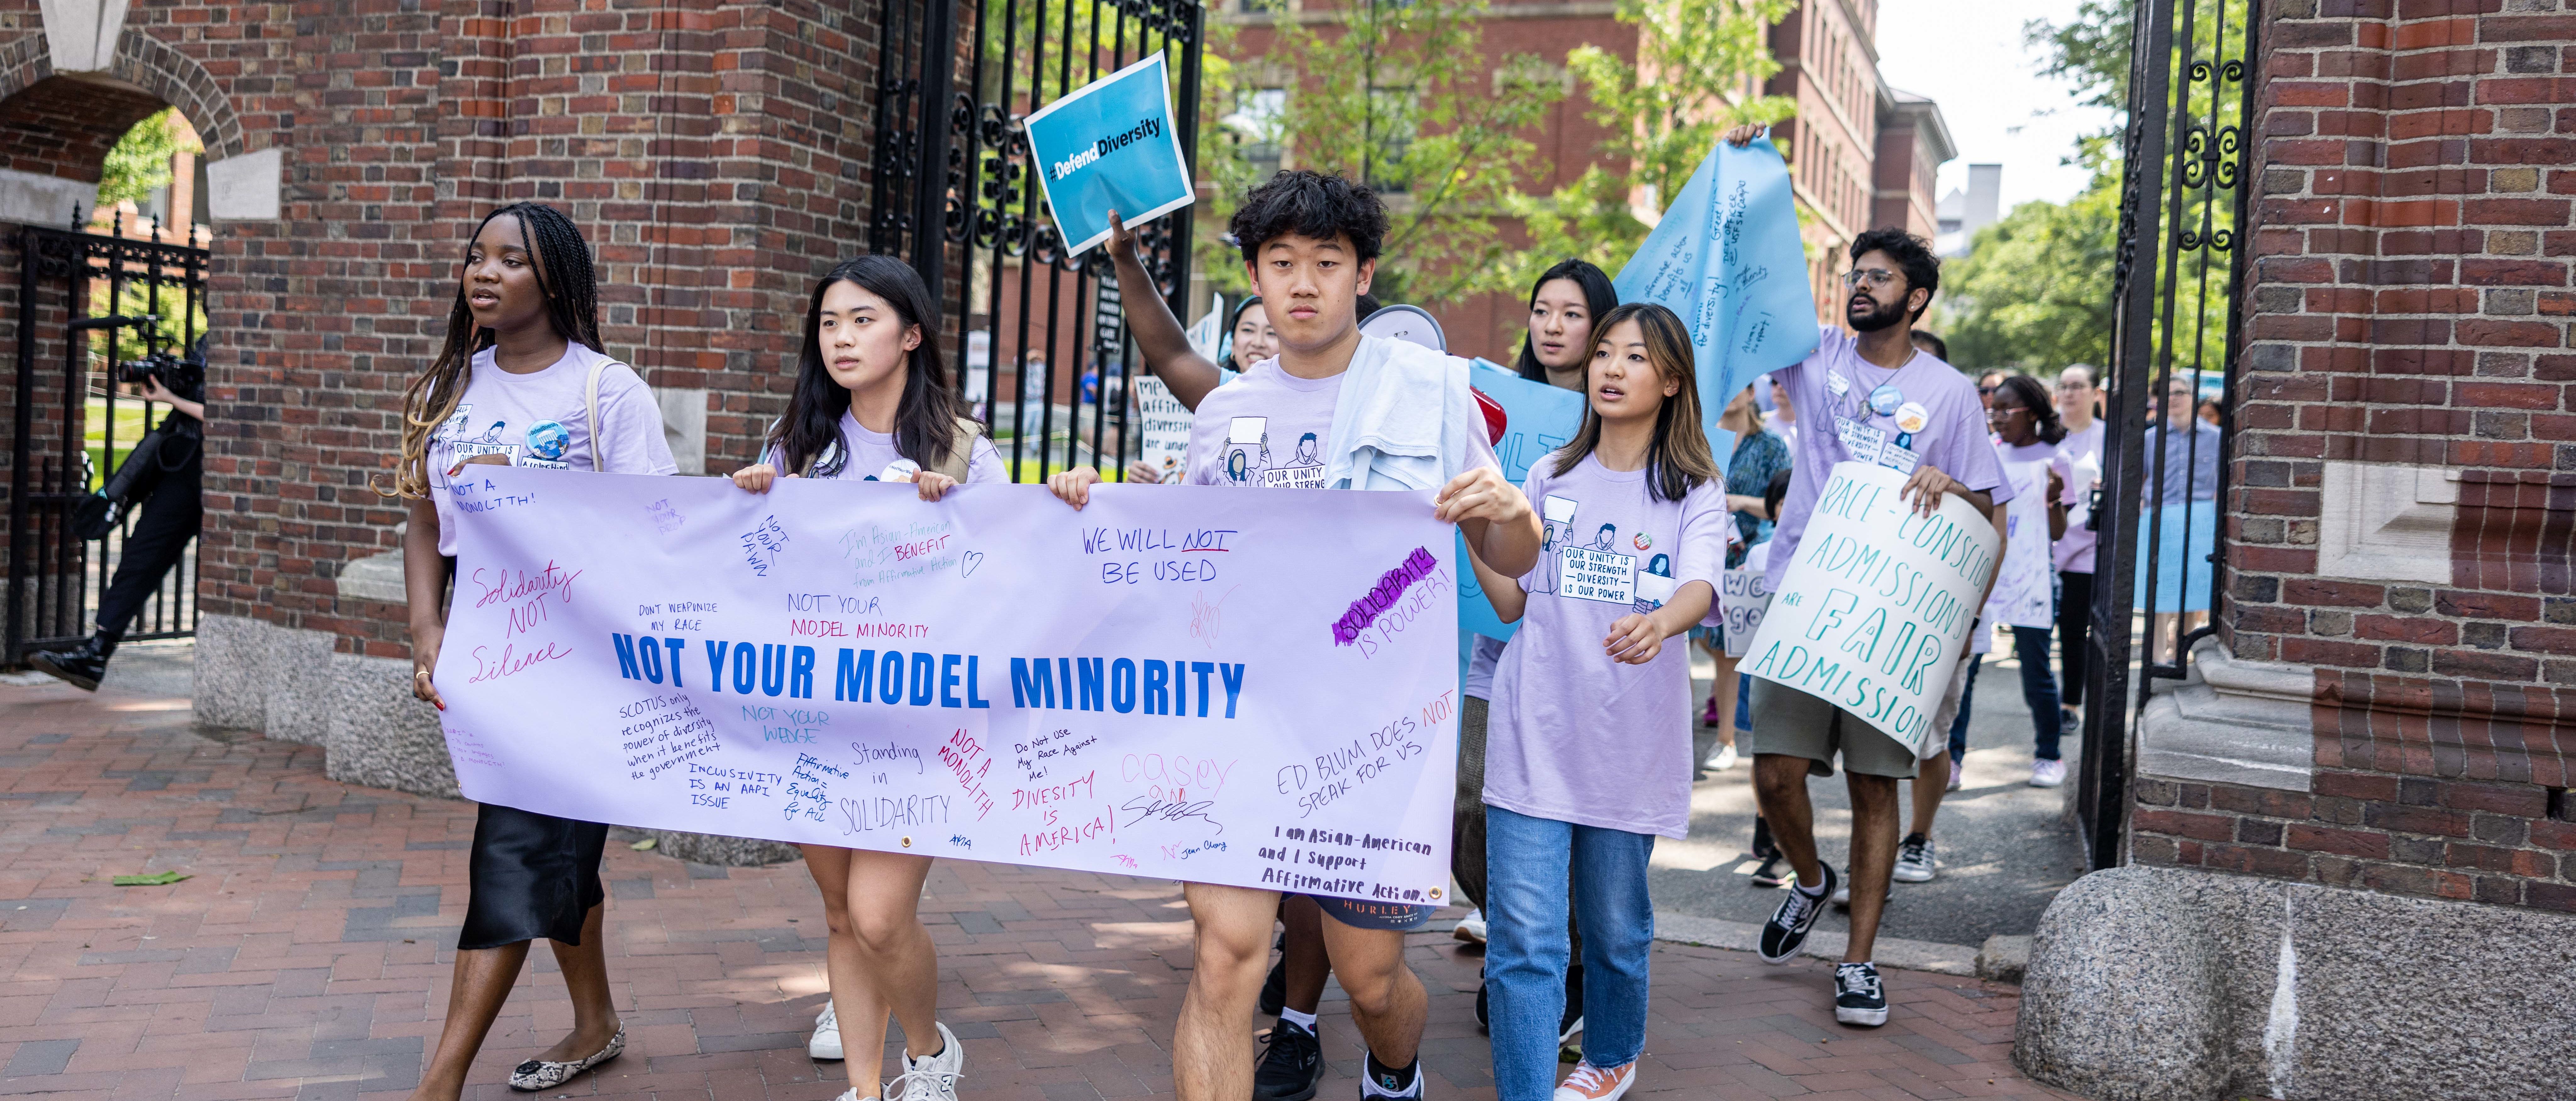 CAMBRIDGE, MASSACHUSETTS - JULY 1: Students and others march through Harvard University in support of Affirmative Action after the Supreme Court ruling on July 1, 2023 in Cambridge, Massachusetts. The Supreme Court's landmark decision on Thursday to gut affirmative action has made it unlawful for colleges to take race into consideration as a specific factor in admissions. (Photo by Scott Eisen/Getty Images)